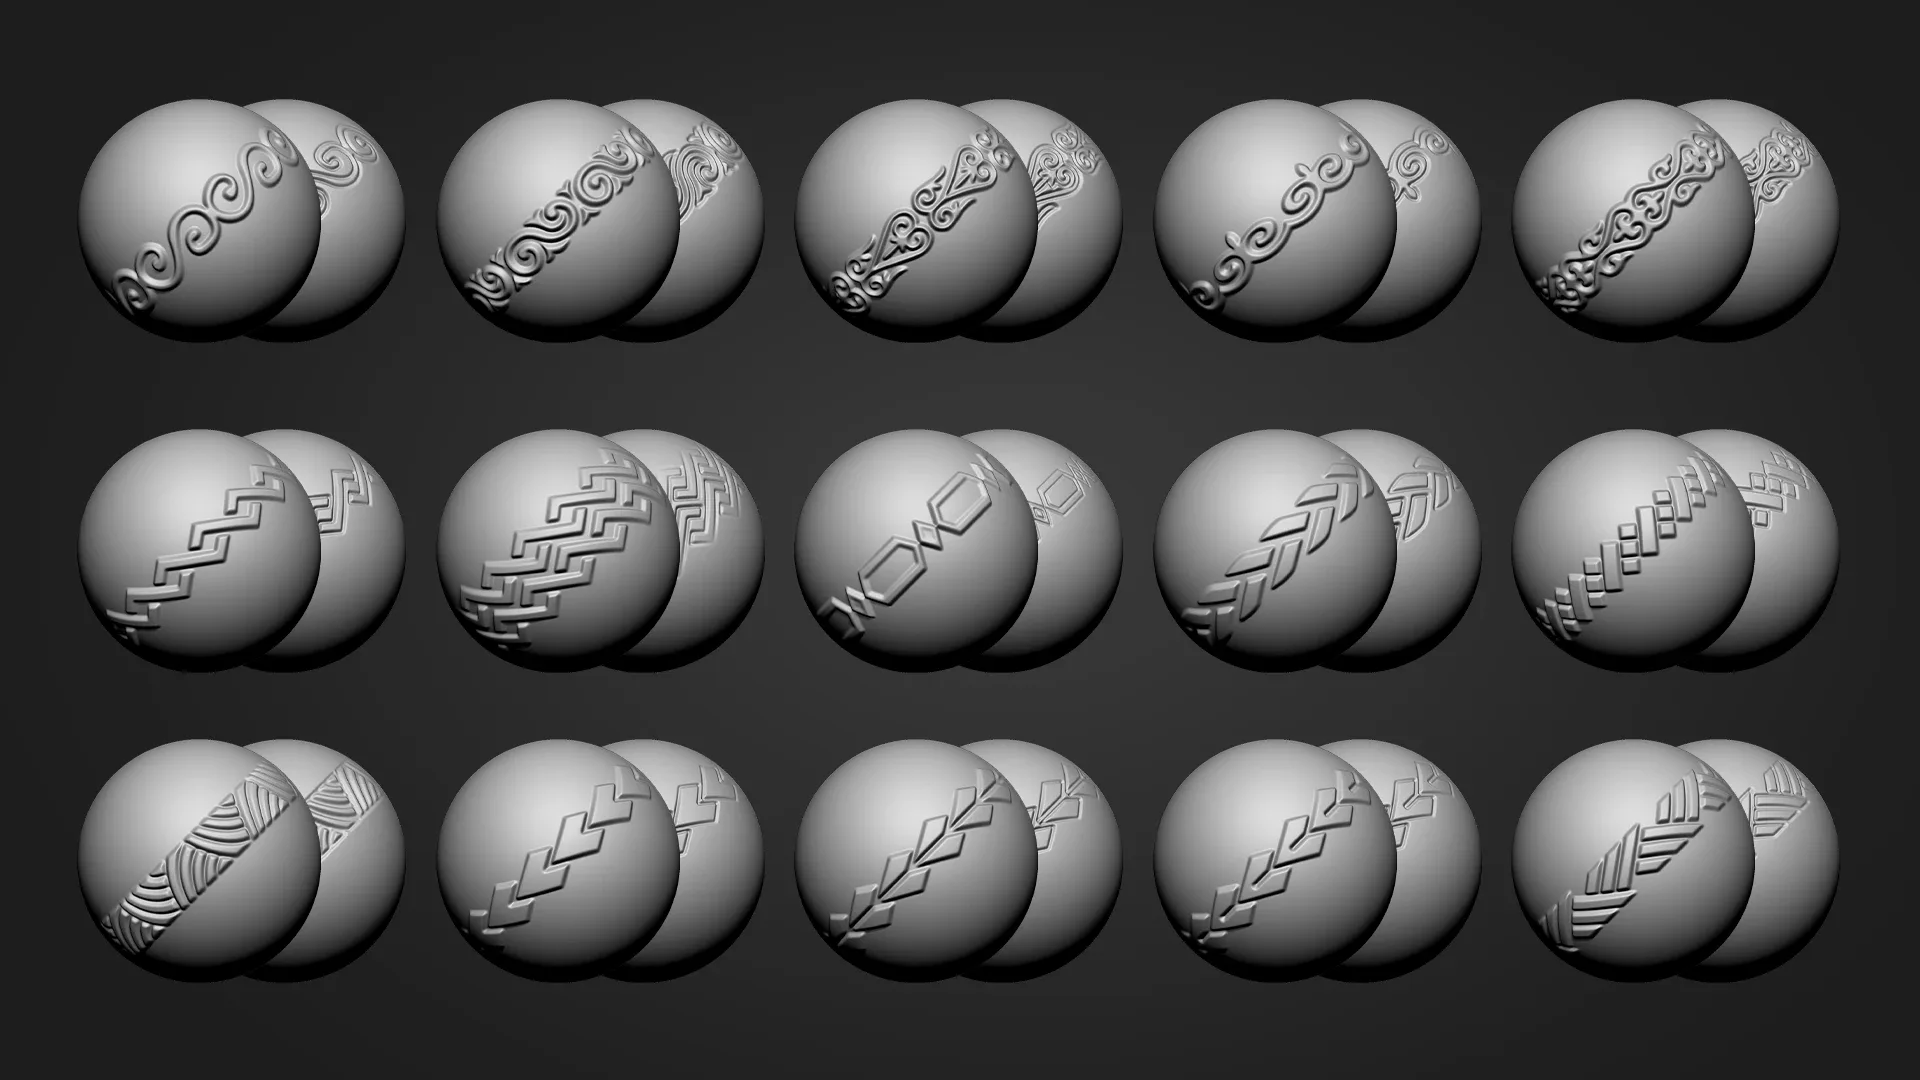 Leather Stamp Tool + 80 Tileable ZBrush Roll Brush + 80 Unique Tileable Alpha (in 2 Style) - Leather Big Bundle VOL 03